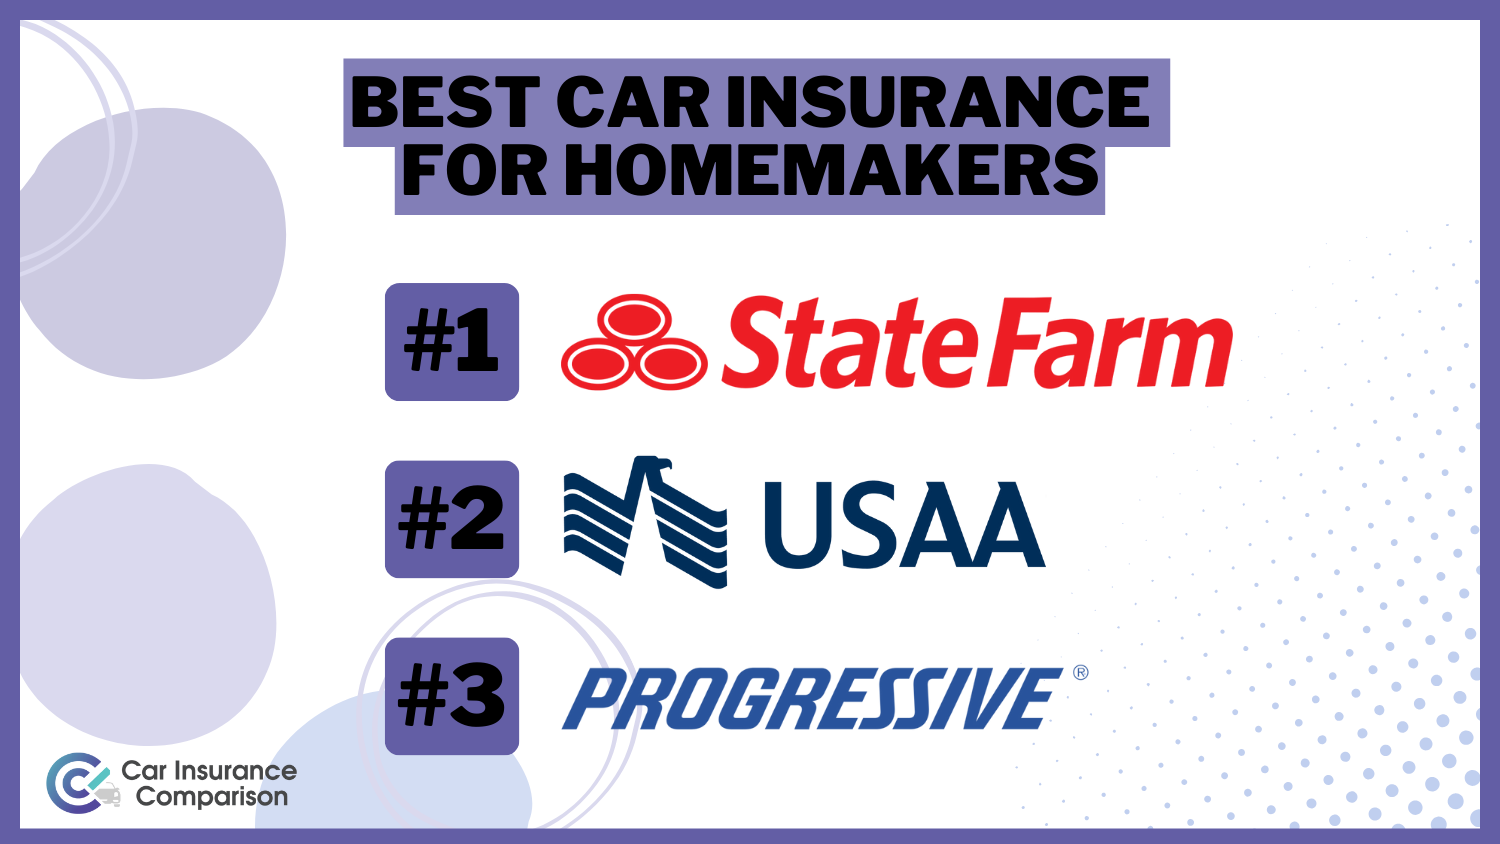 3 Best Car Insurance for Homemakers: State Farm, USAA, and Progressive.